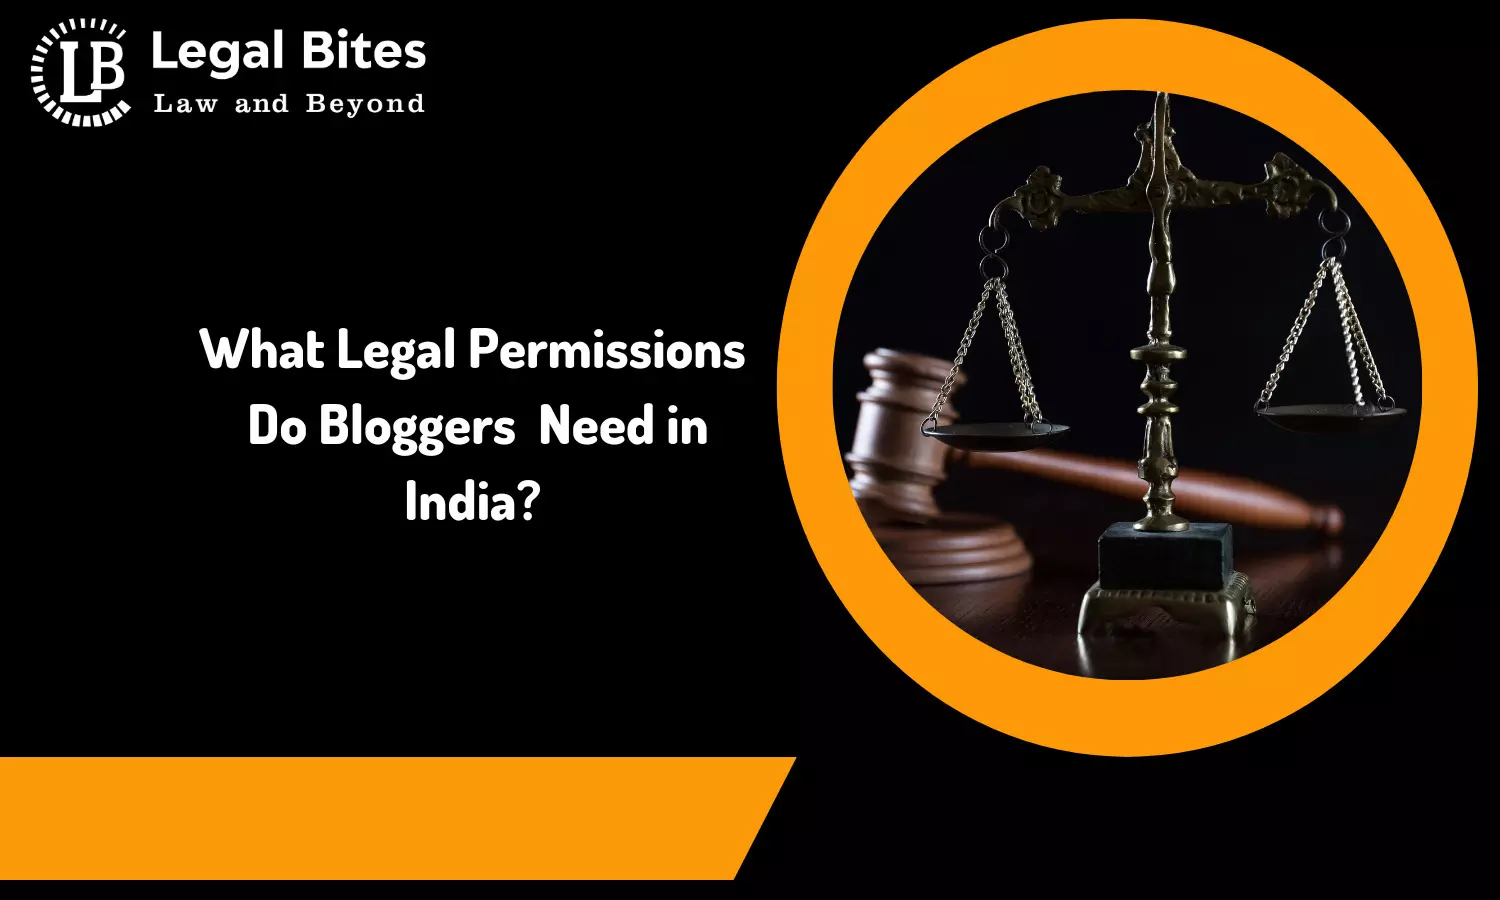 What legal permissions do bloggers need in India?